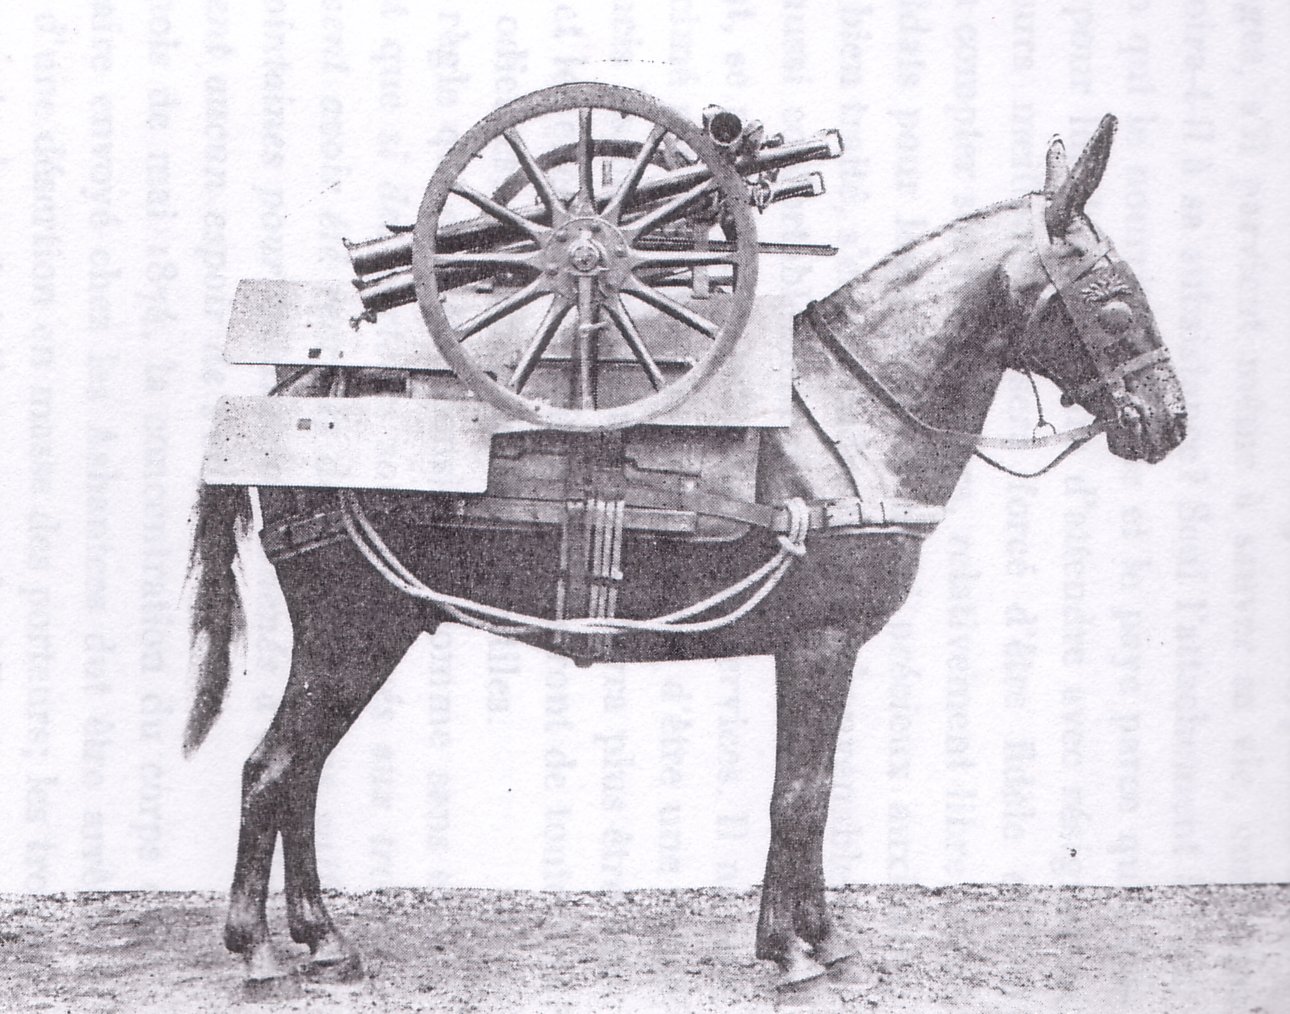 70mm Howitzer wheels and shield mounted on a pack mule